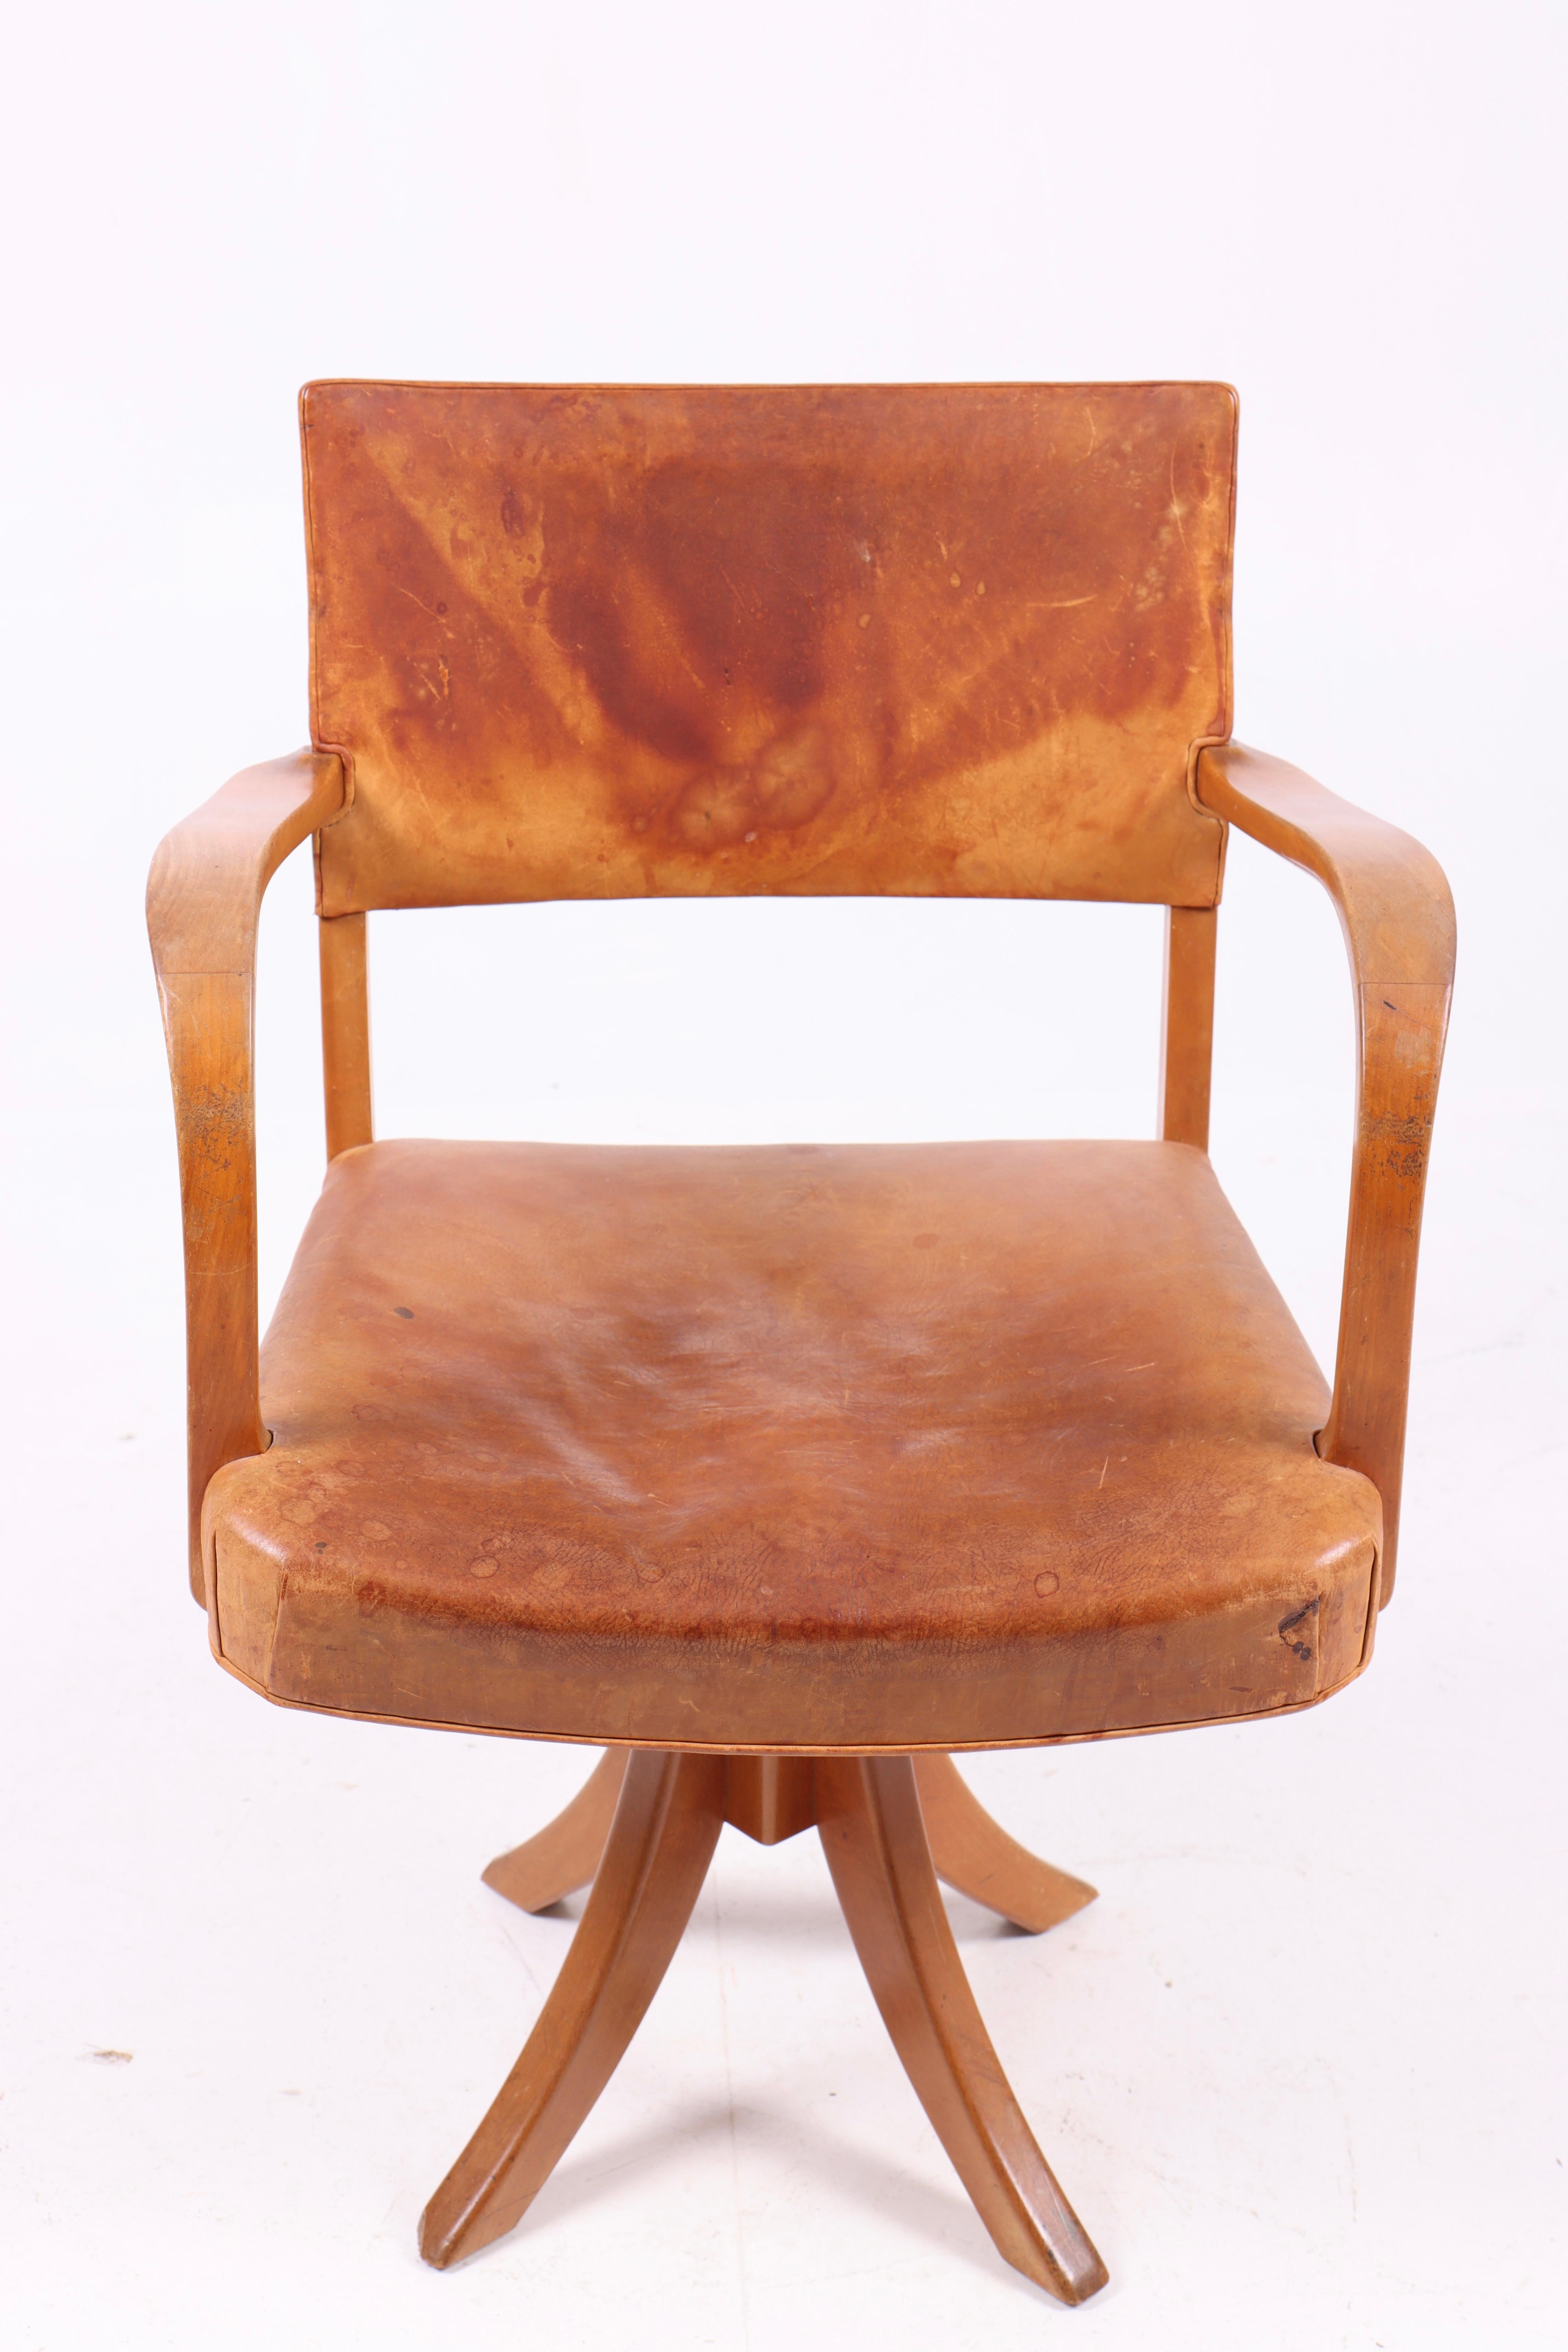 Swivel chair in patinated original leather. Designed and made in Denmark, great original condition.